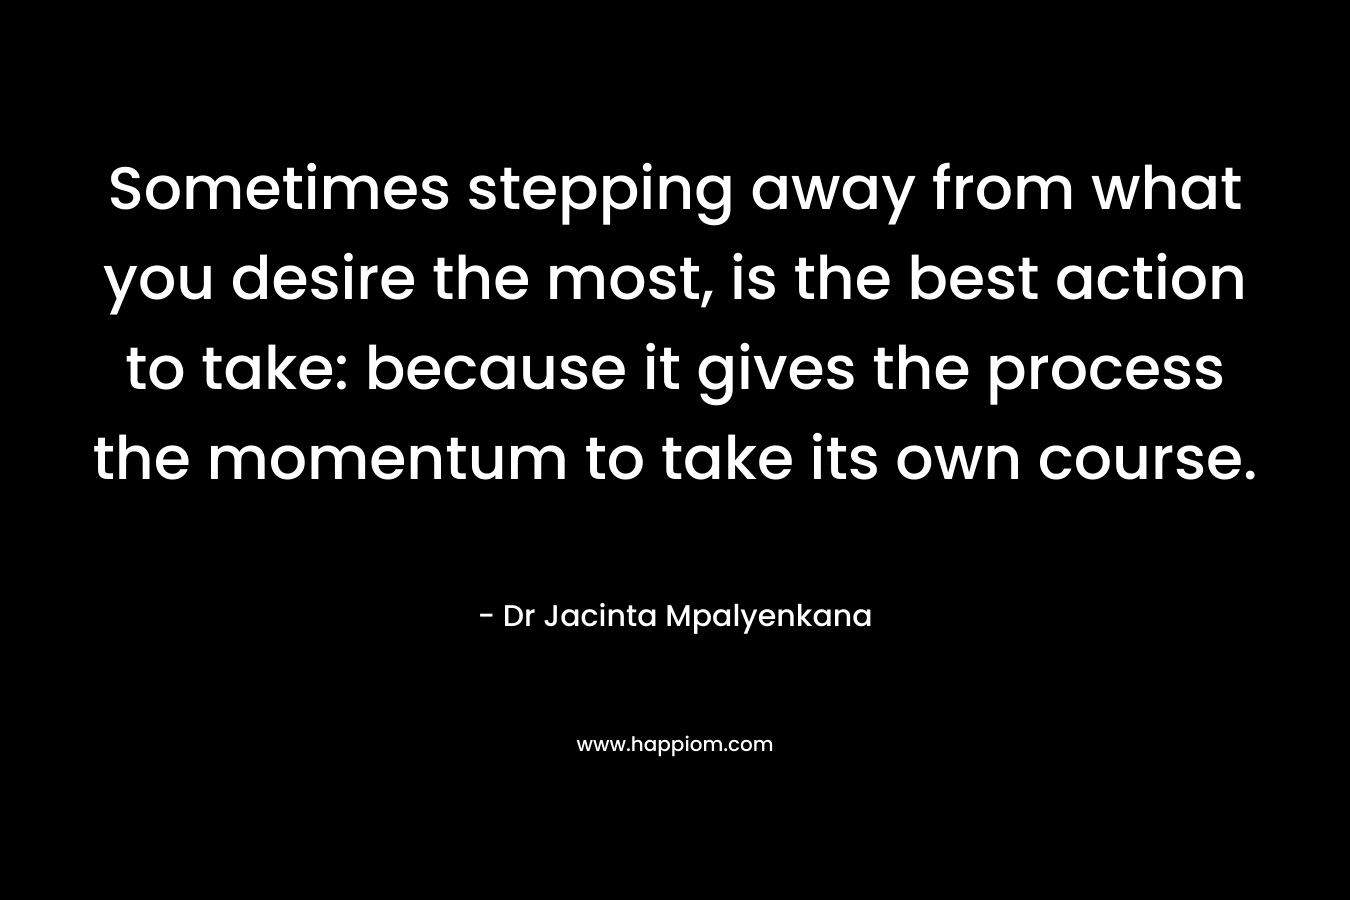 Sometimes stepping away from what you desire the most, is the best action to take: because it gives the process the momentum to take its own course. – Dr Jacinta Mpalyenkana